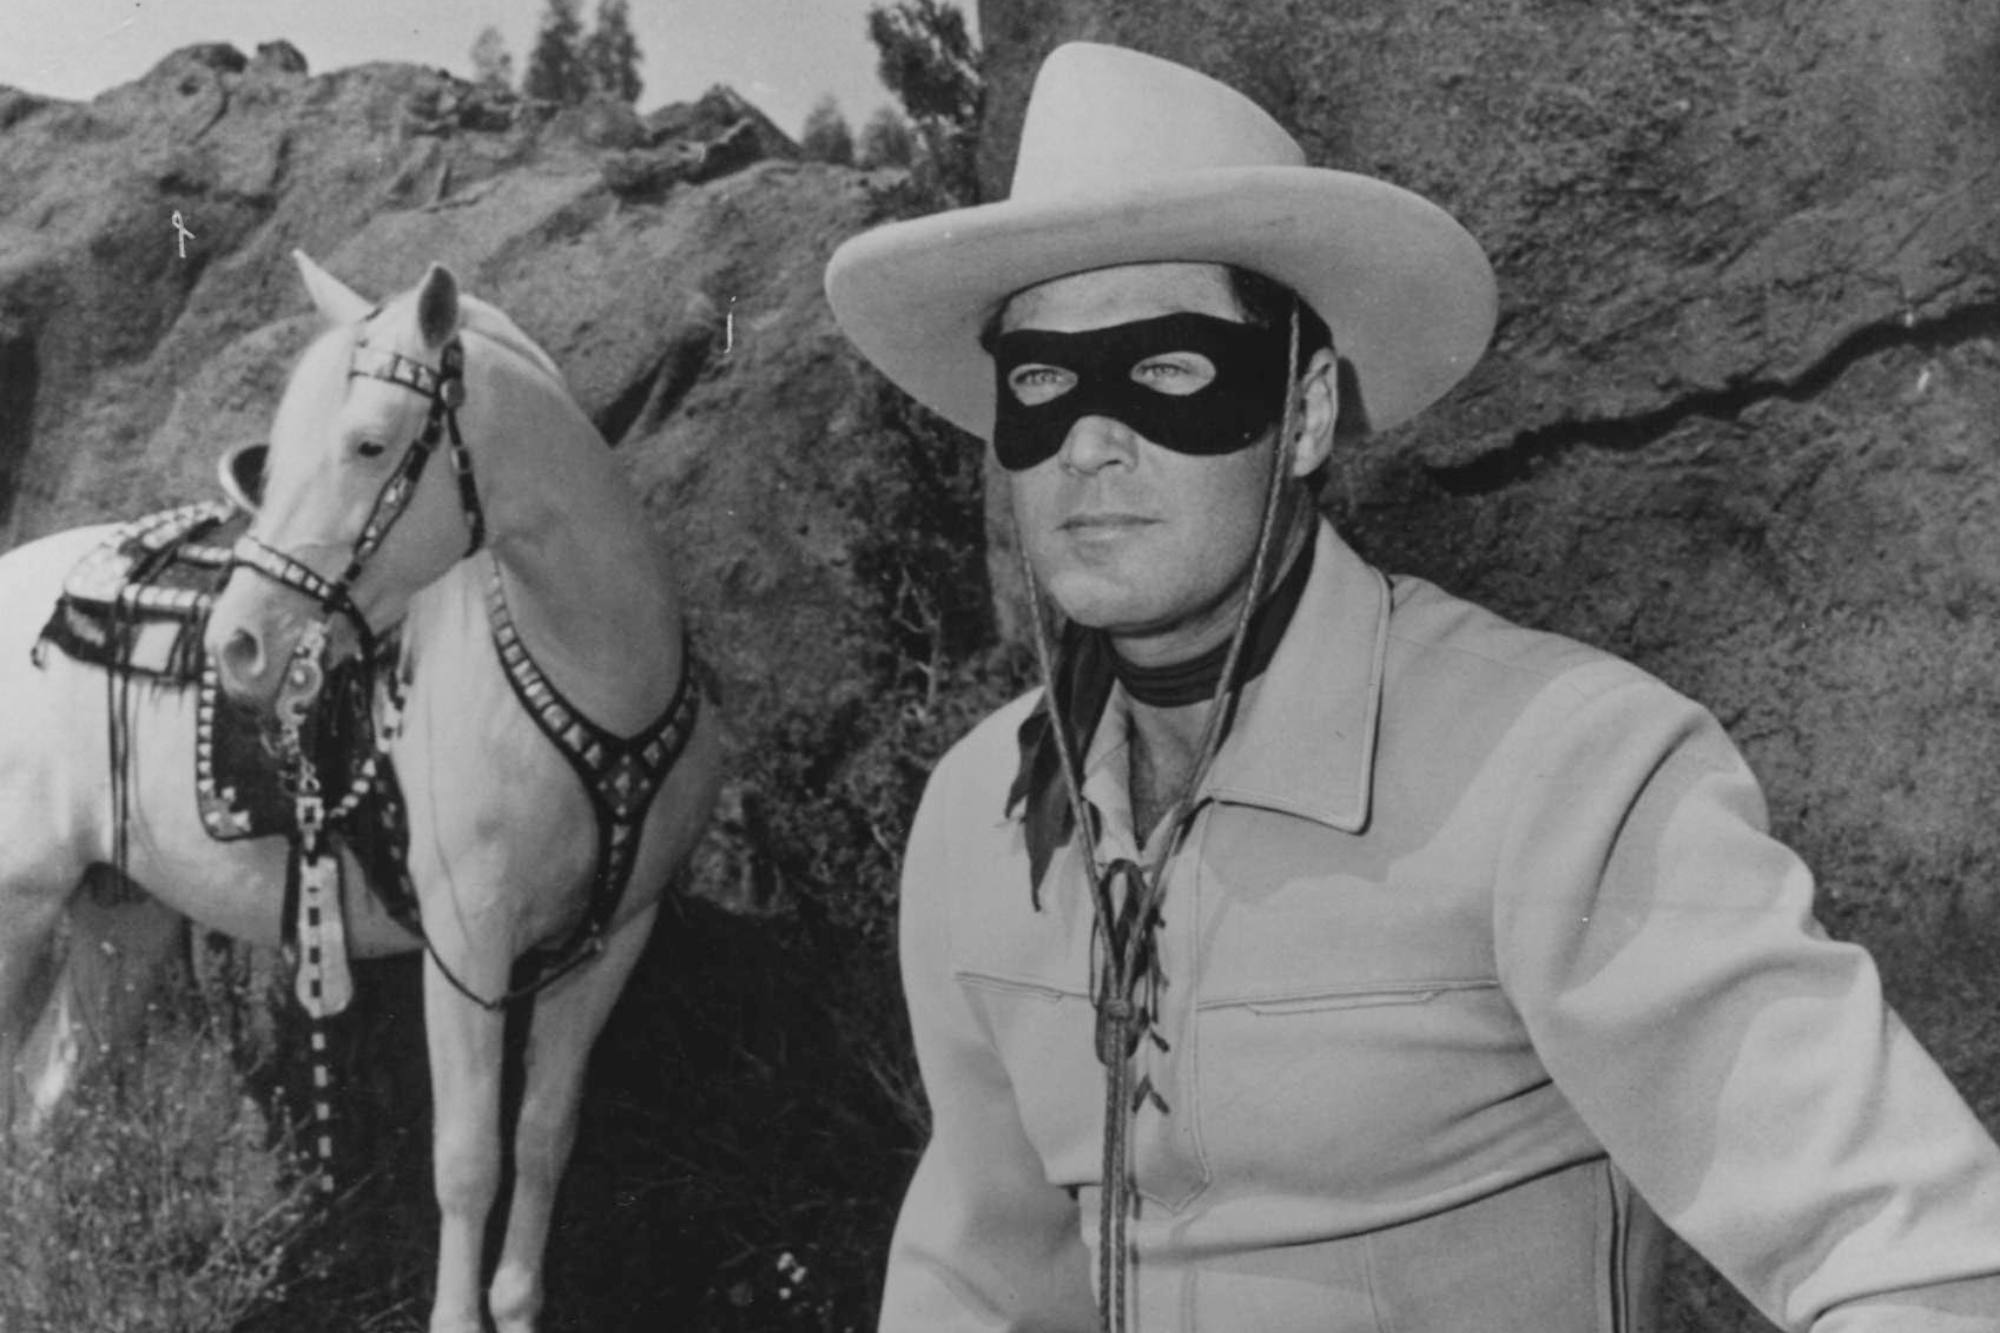 'The Lone Ranger' Season 3 Clayton Moore wearing his Western costume, standing in front of his white horse.